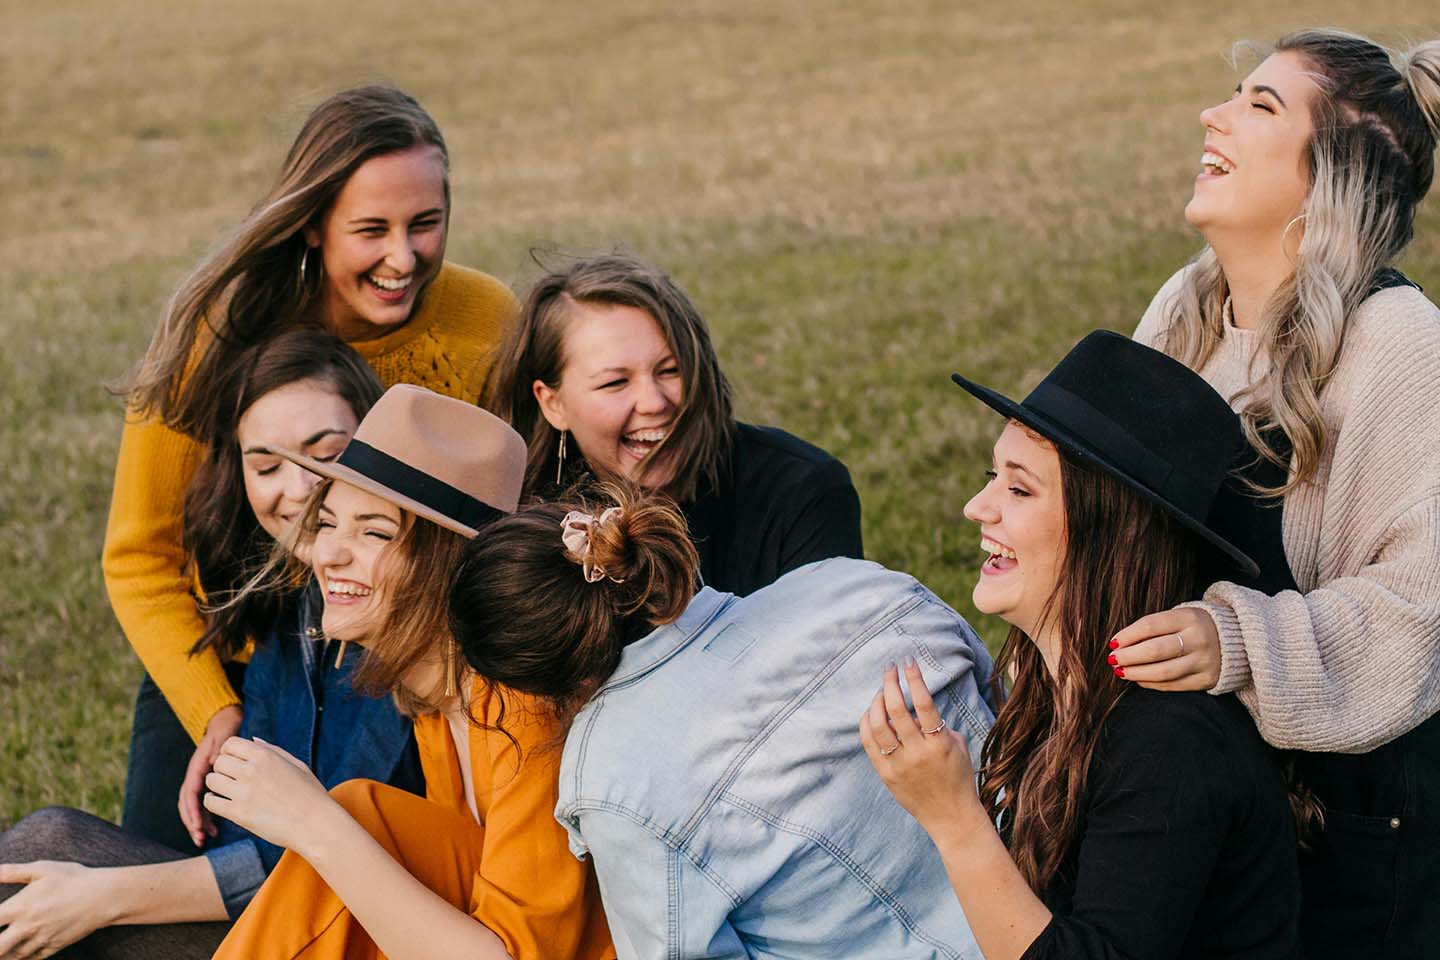 Group of women in a field laughing